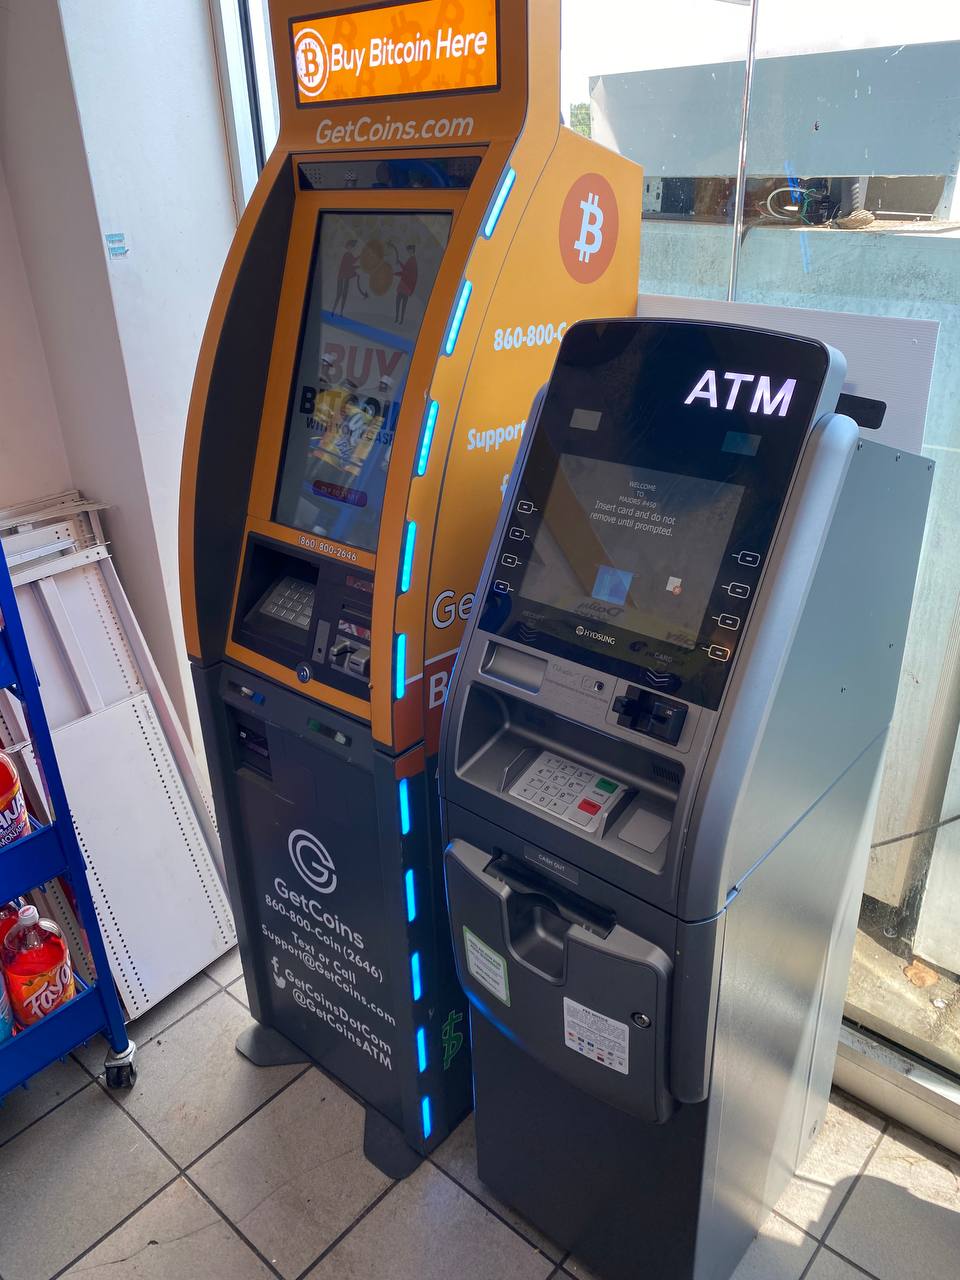 Getcoins - Bitcoin ATM - Inside of Exxon in Memphis, Tennessee